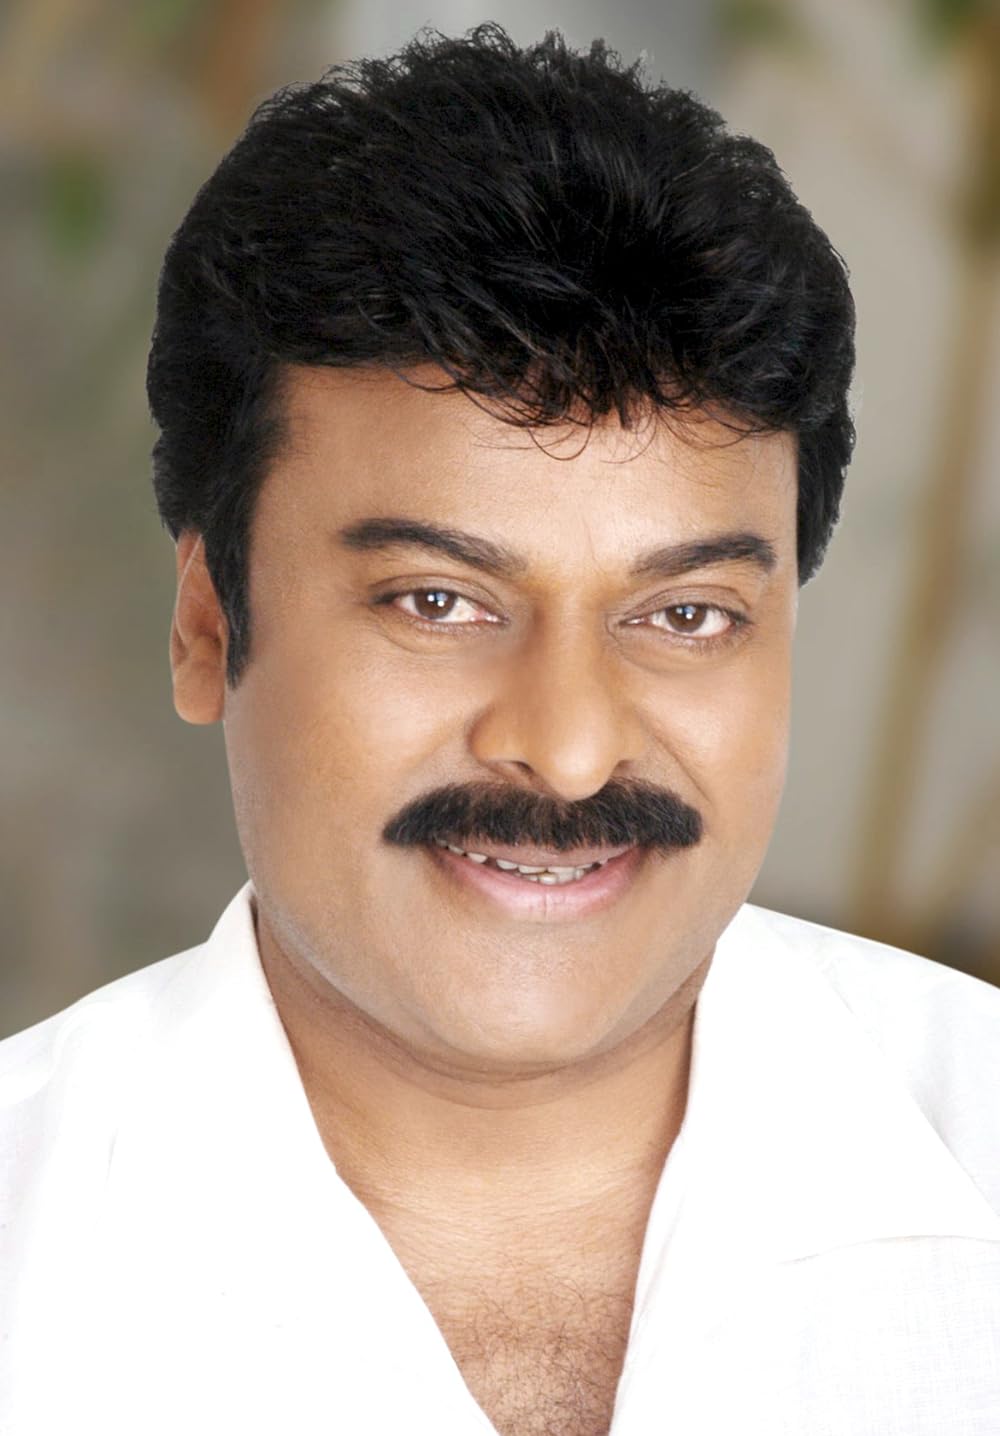 Chiranjeevi: A stalwart in Telugu cinema, Chiranjeevi's illustrious career spans four decades. From his debut in Pranam Khareedu in 1978 to over 150 films, he holds a unique status among Indian cinema stars. Chiranjeevi, a beloved actor and politician, leads the influential Konidela family, with popular actors like Pawan Kalyan and Ram Charan as part of his kin.